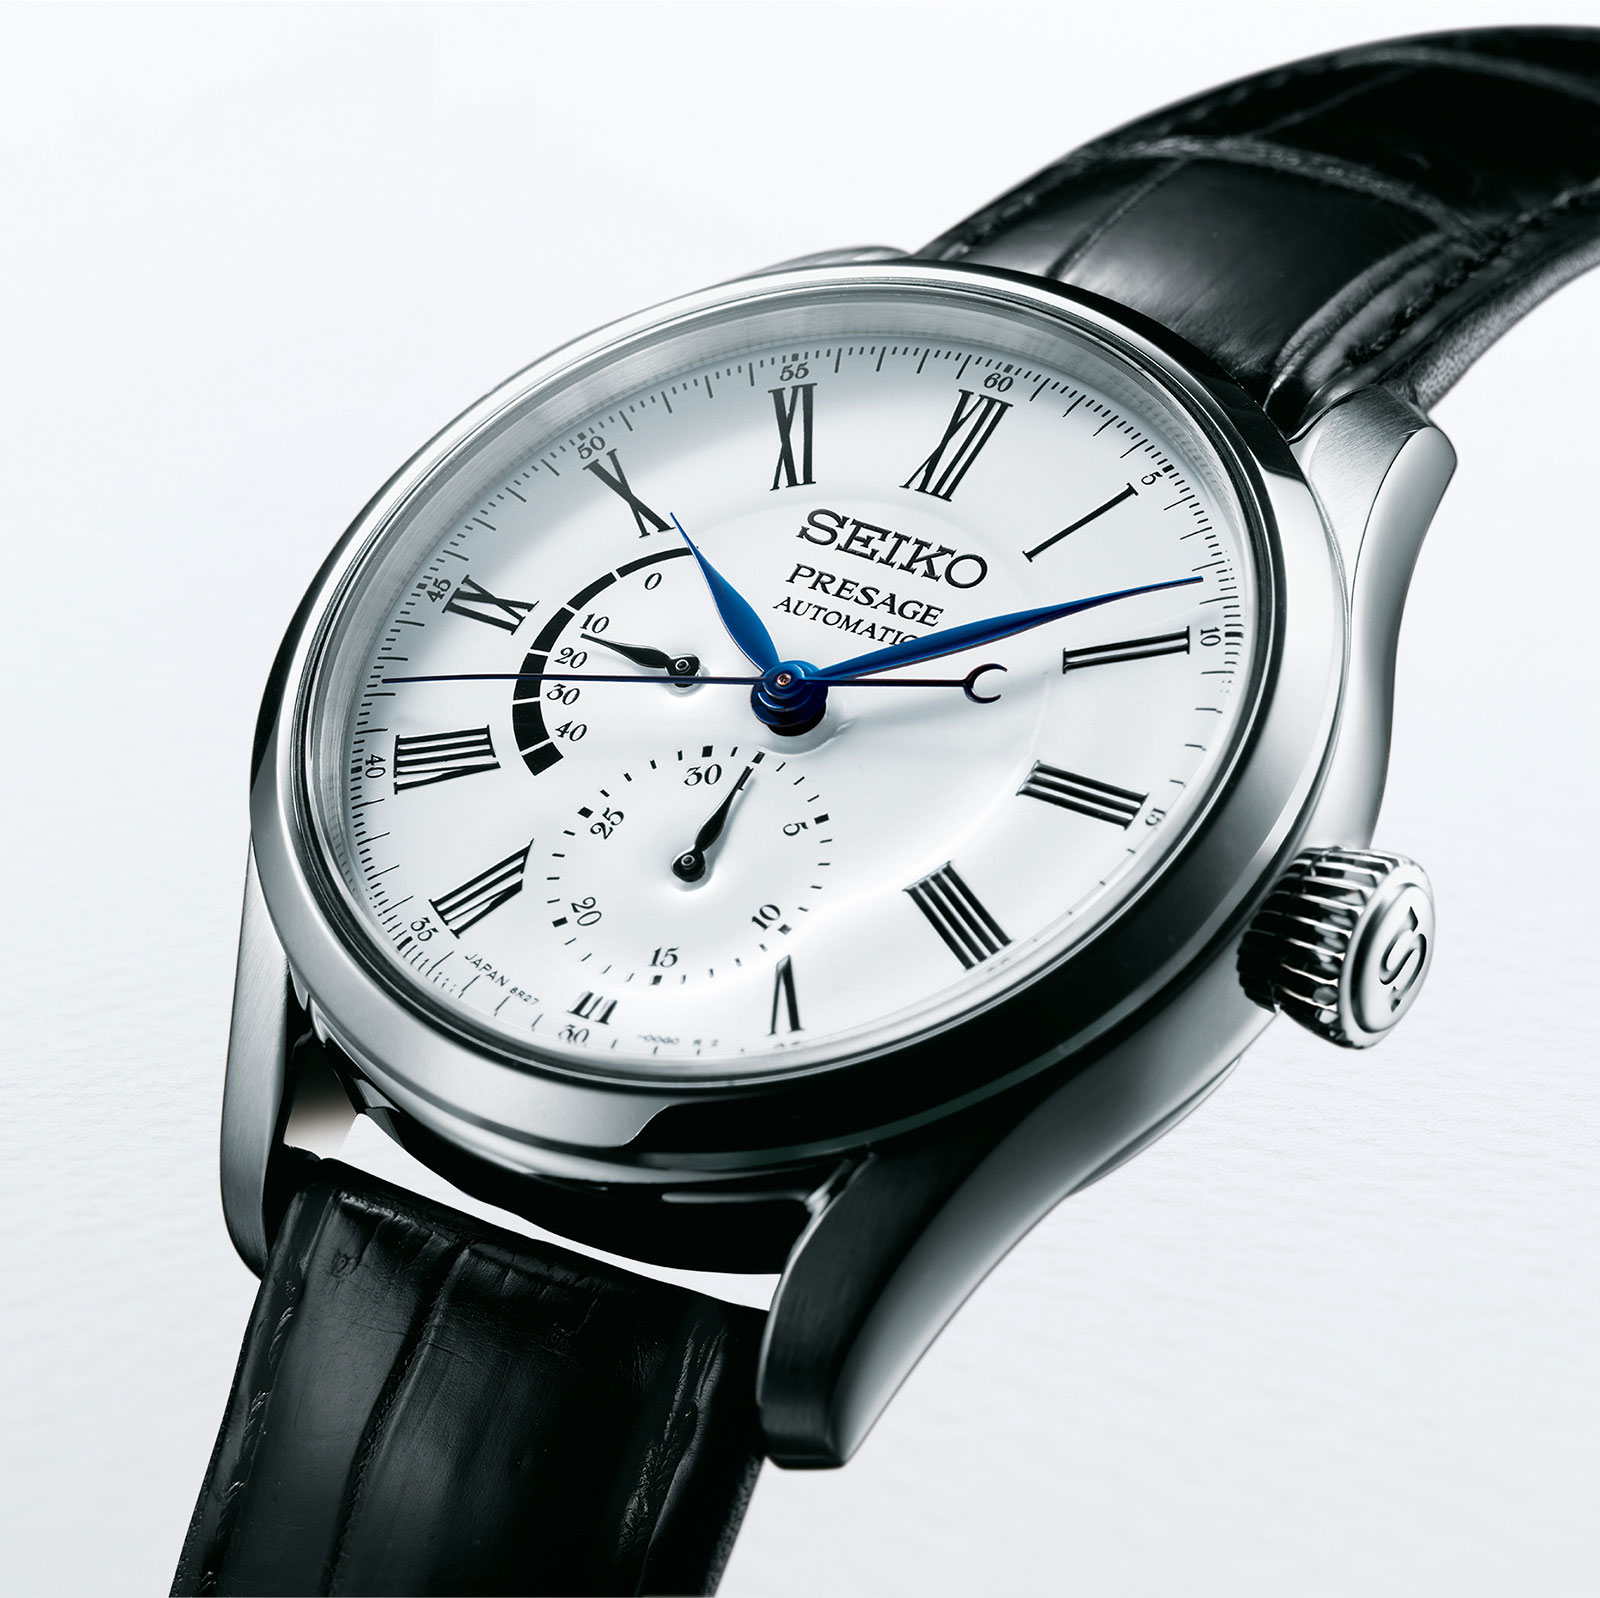 Seiko Presage: Collection of Affordable Enamel Dial Watches